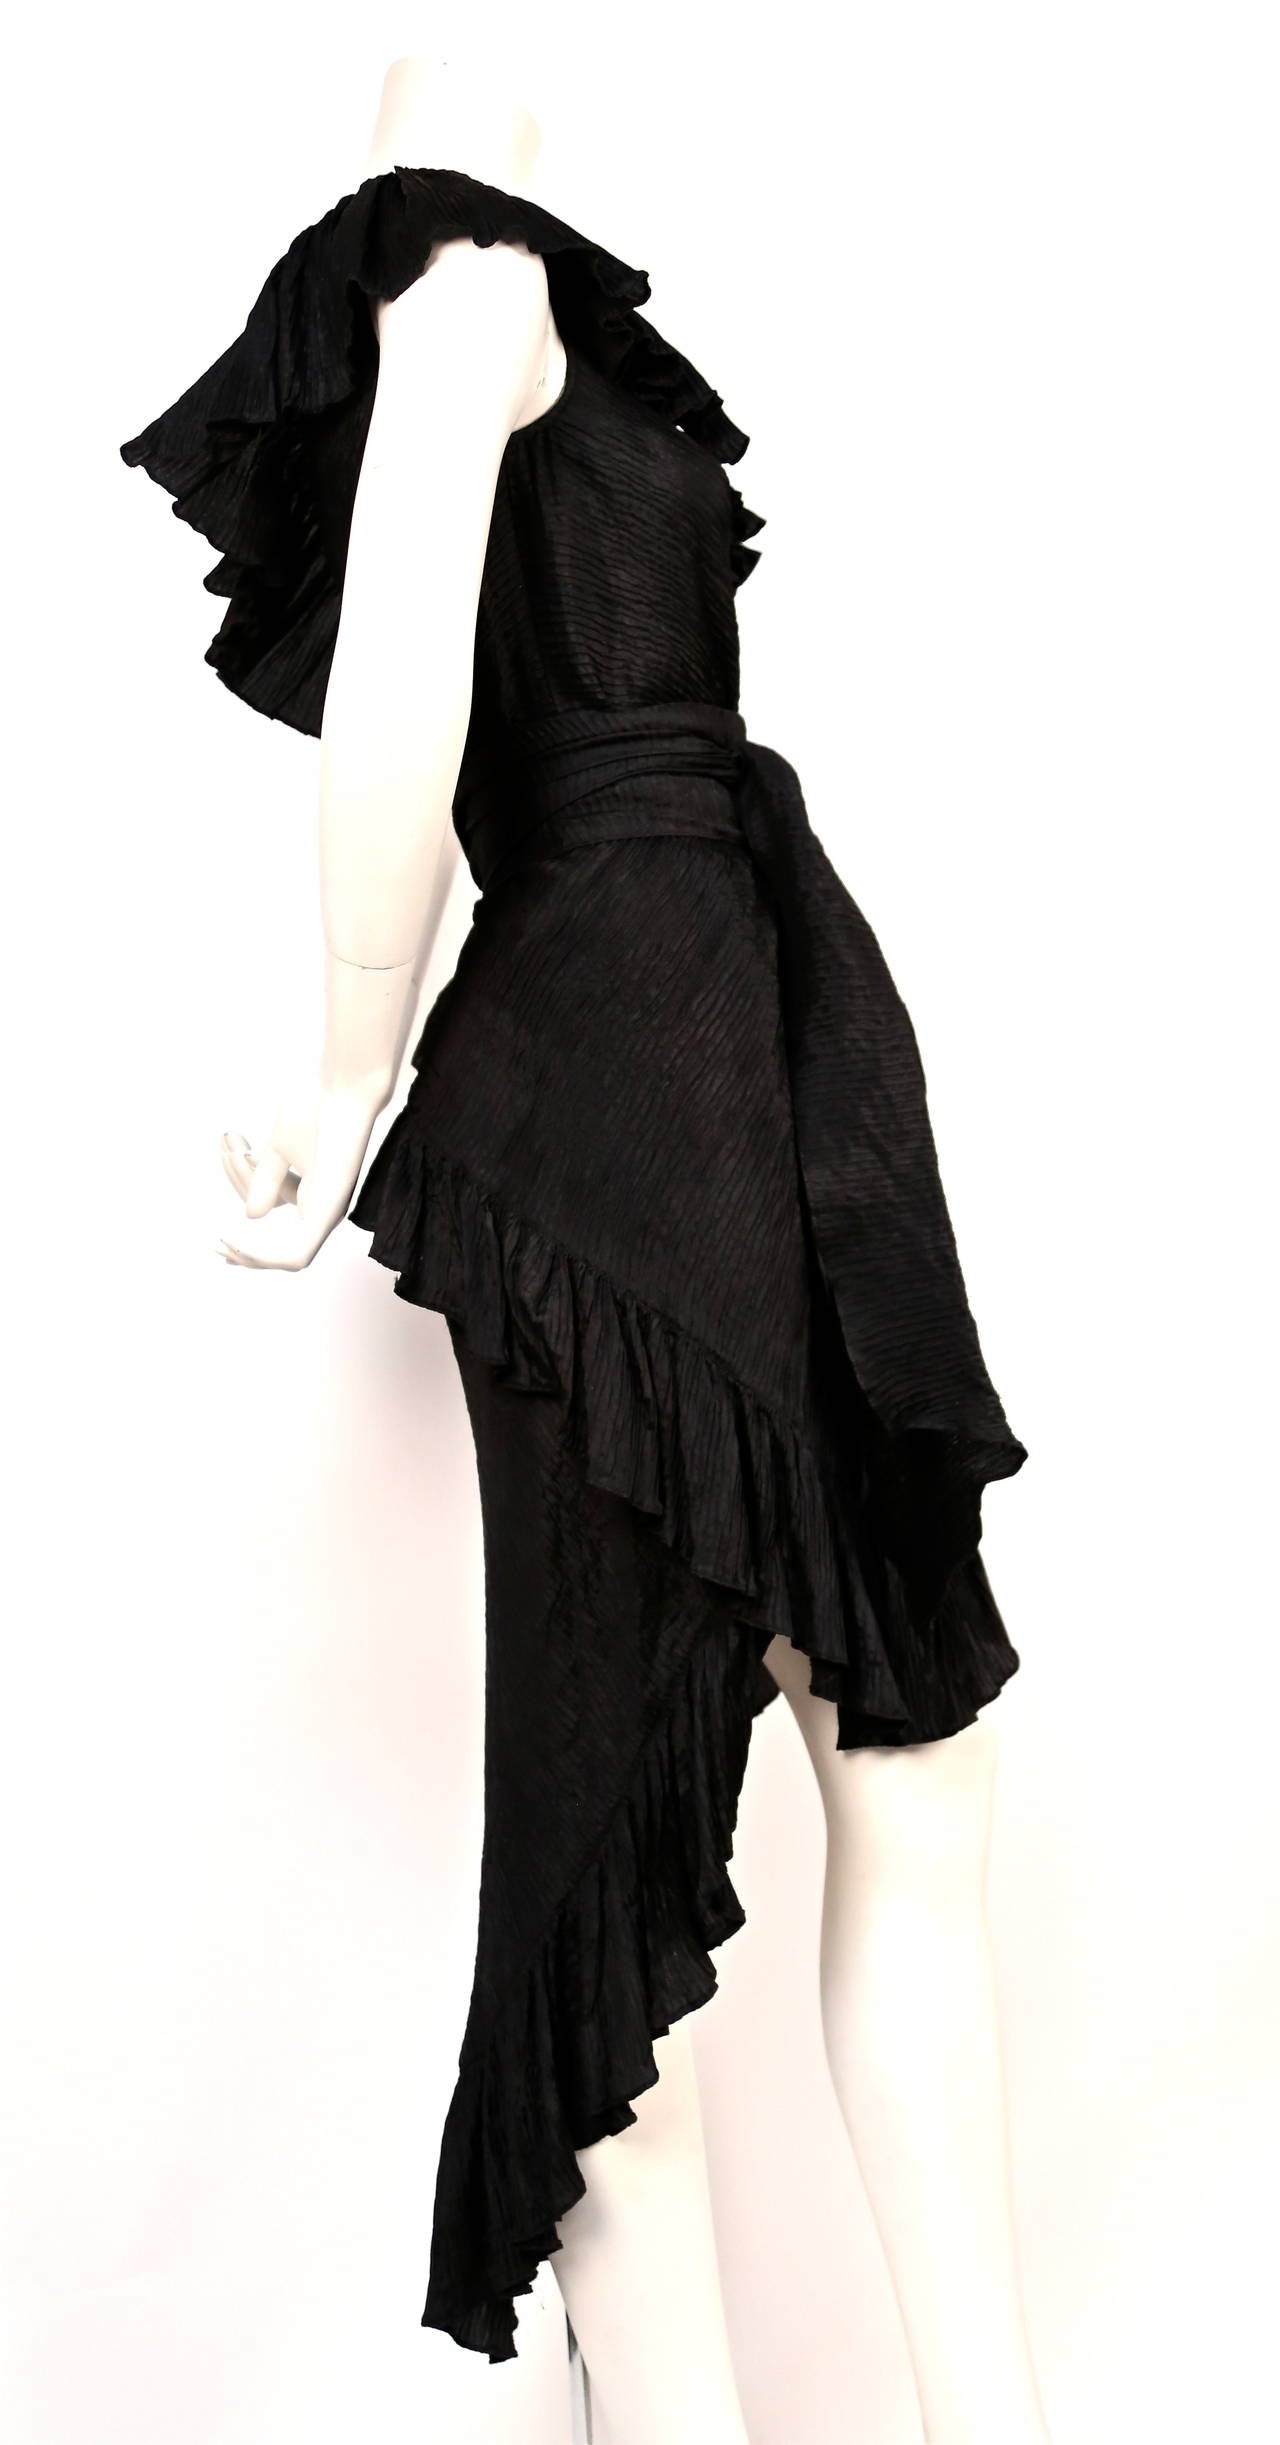 Jet black pleated silk dress with asymmetrical hemline from Yves Saint Laurent dating to the 1970's. Matching long sash included. Approximate measurements: bust 34